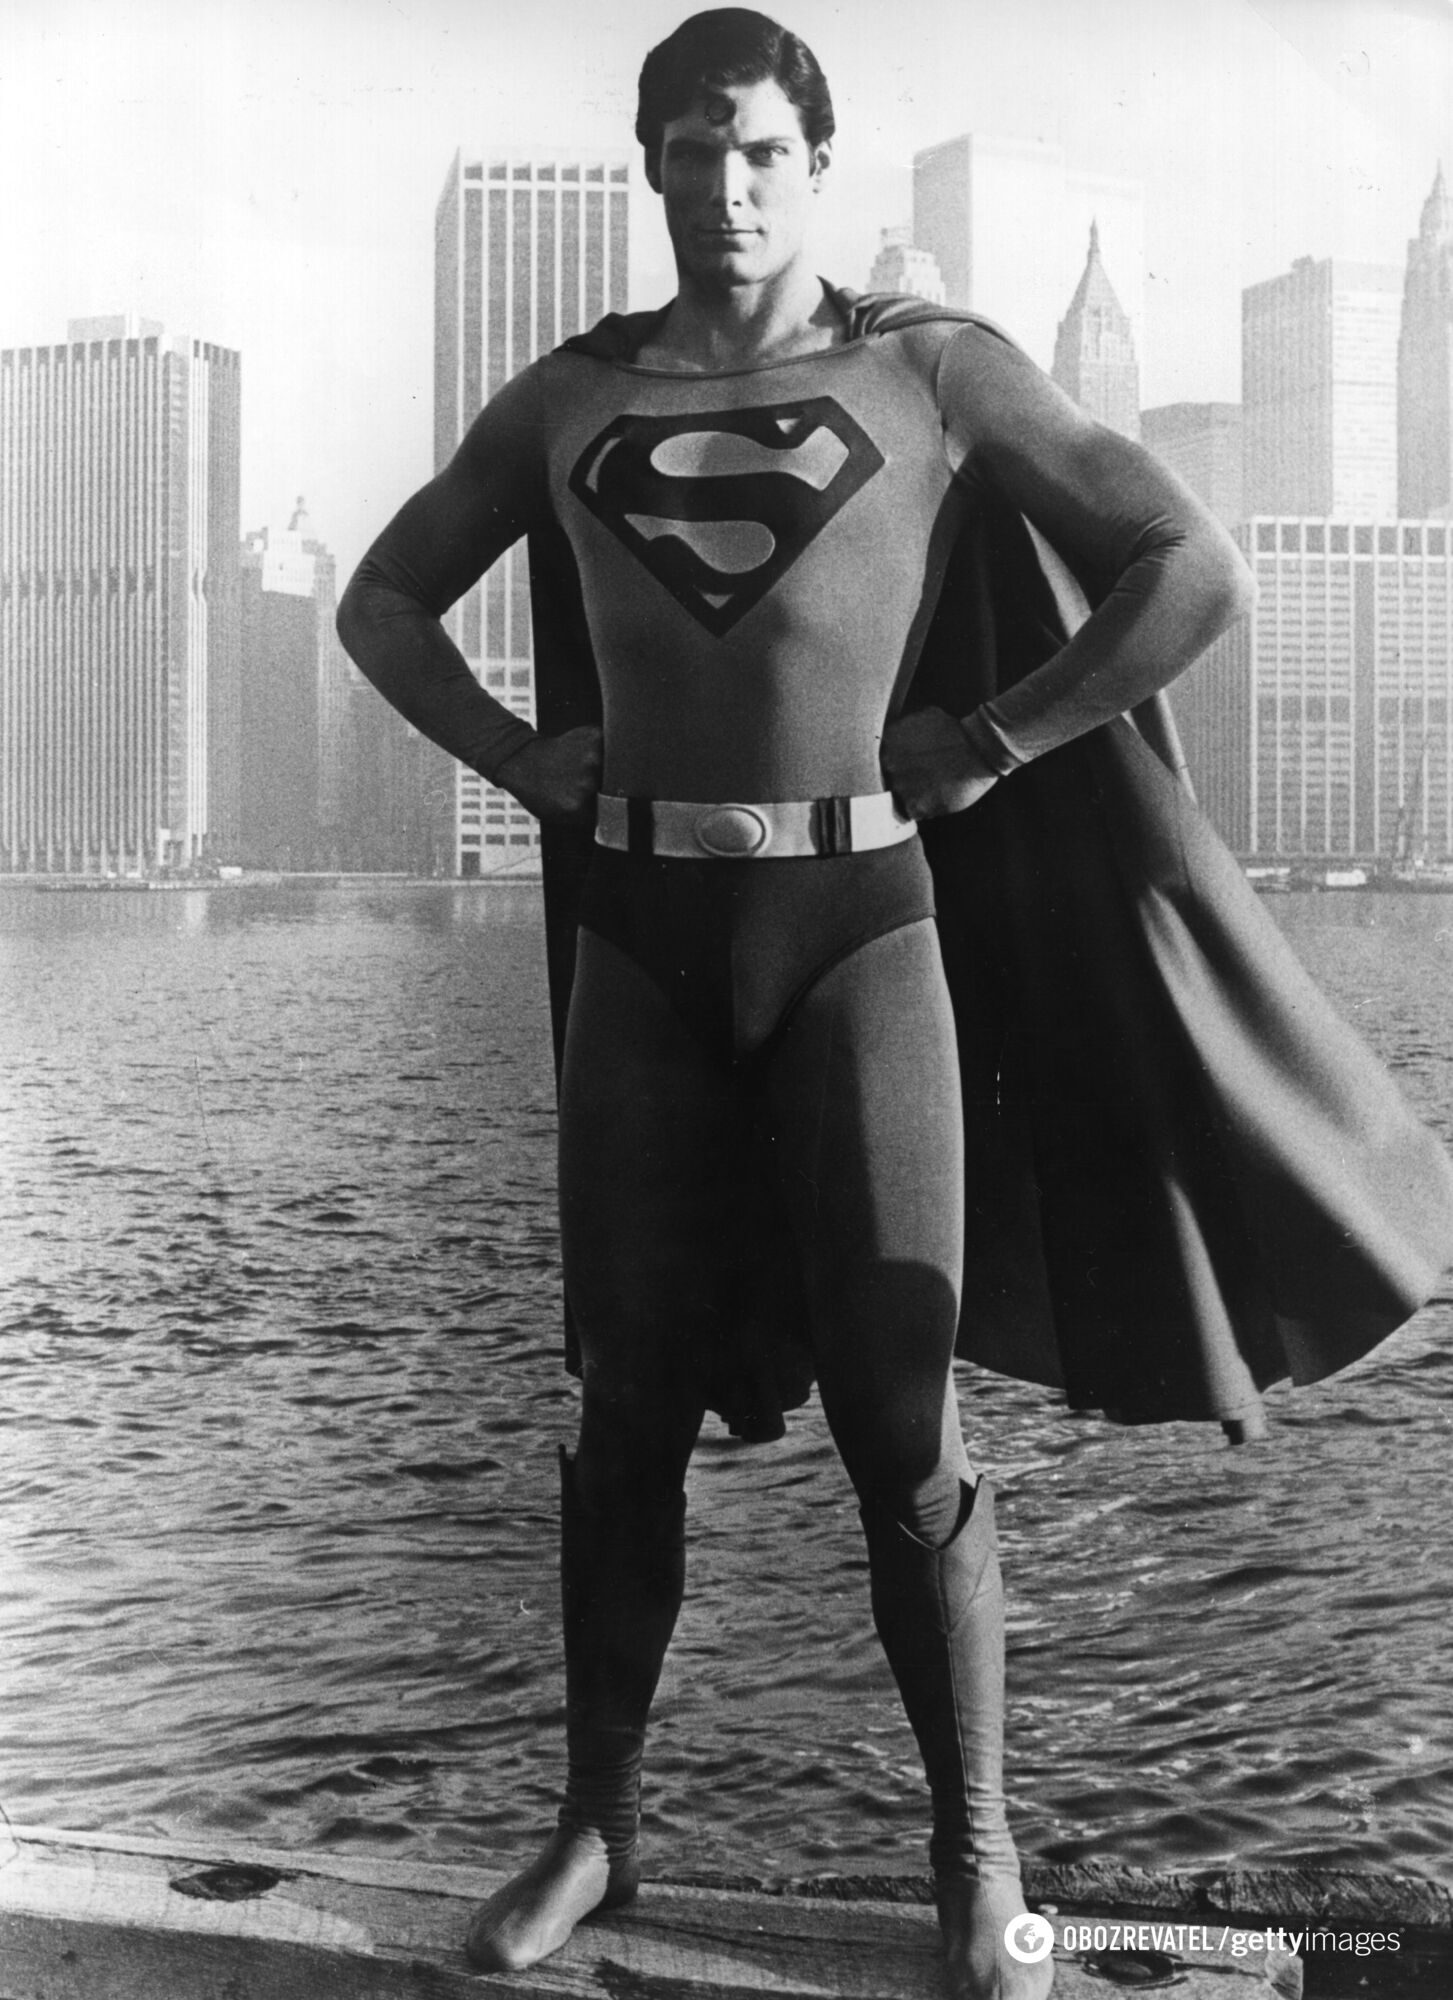 He was Superman, but ended up in a wheelchair: the tragic life story of Christopher Reeve, who remained a superman despite everything